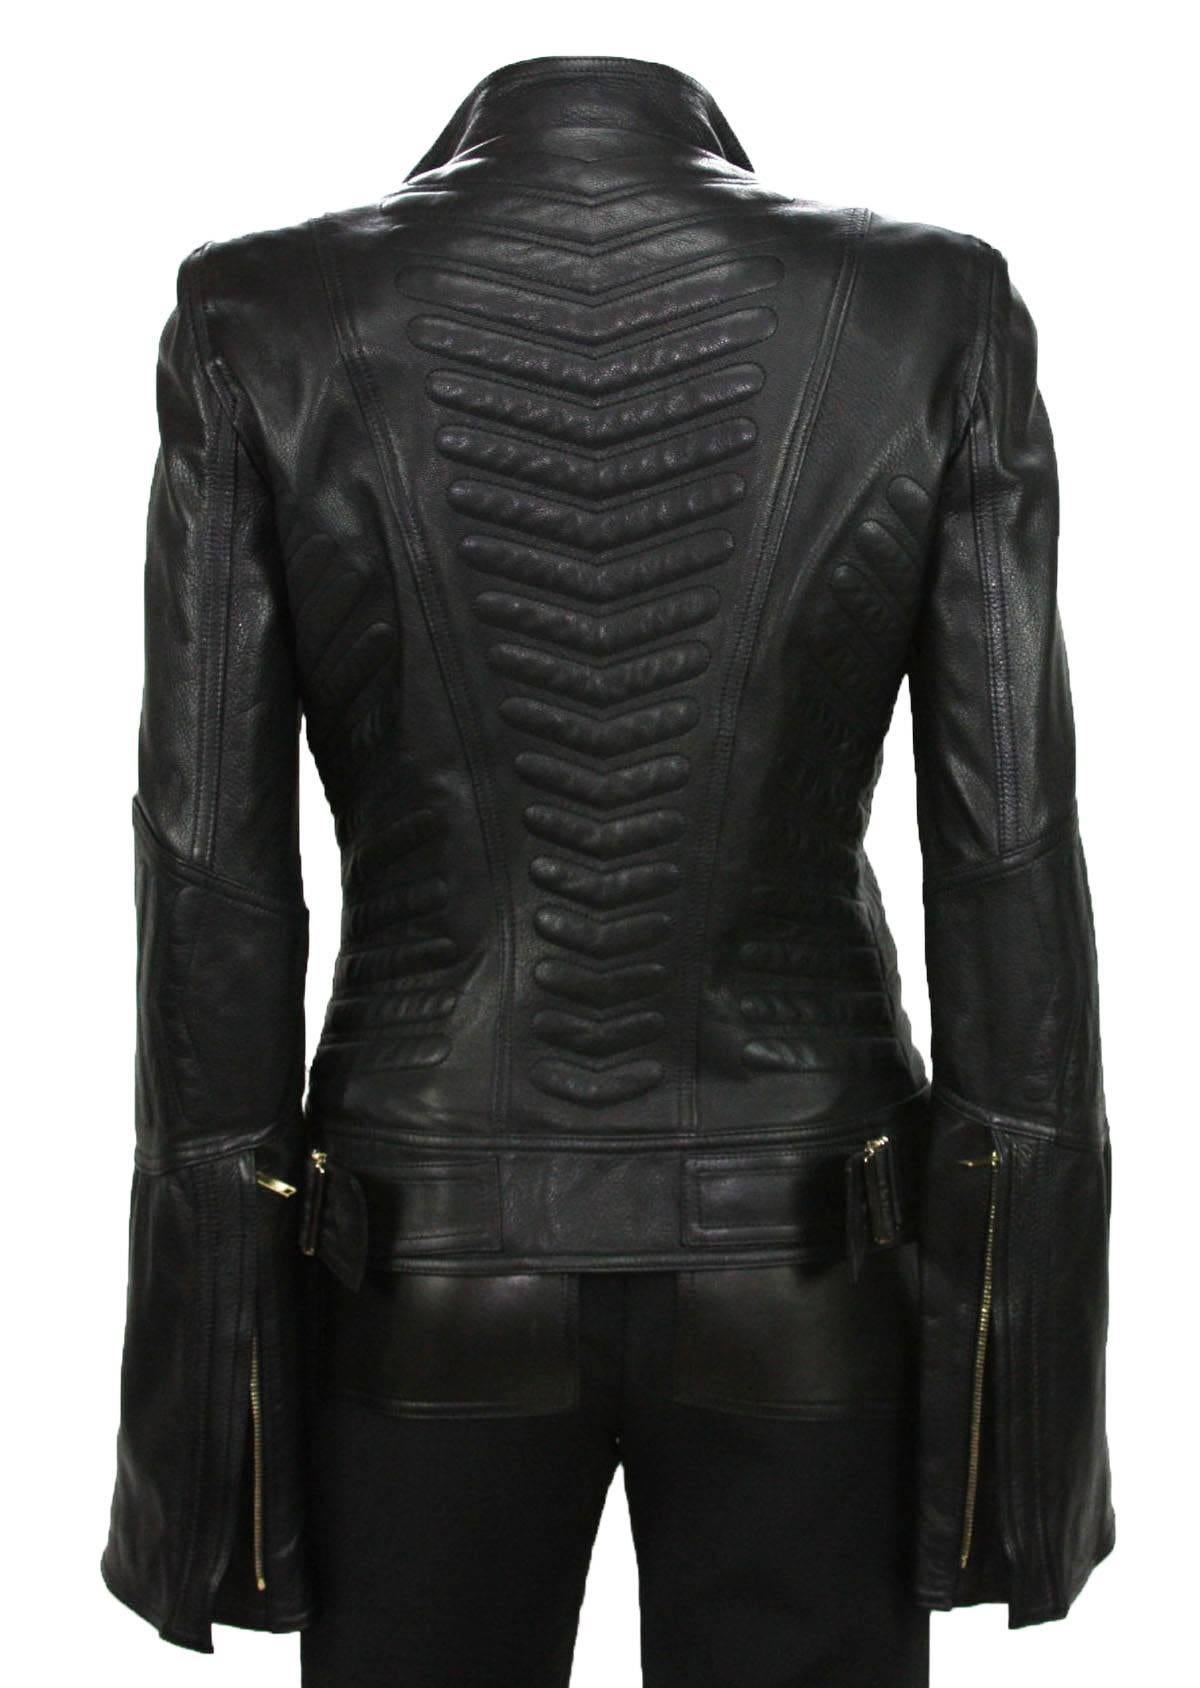 Women's New TOM FORD for GUCCI 2004 Collection Leather Chevron Black Jacket It 40 - US 4